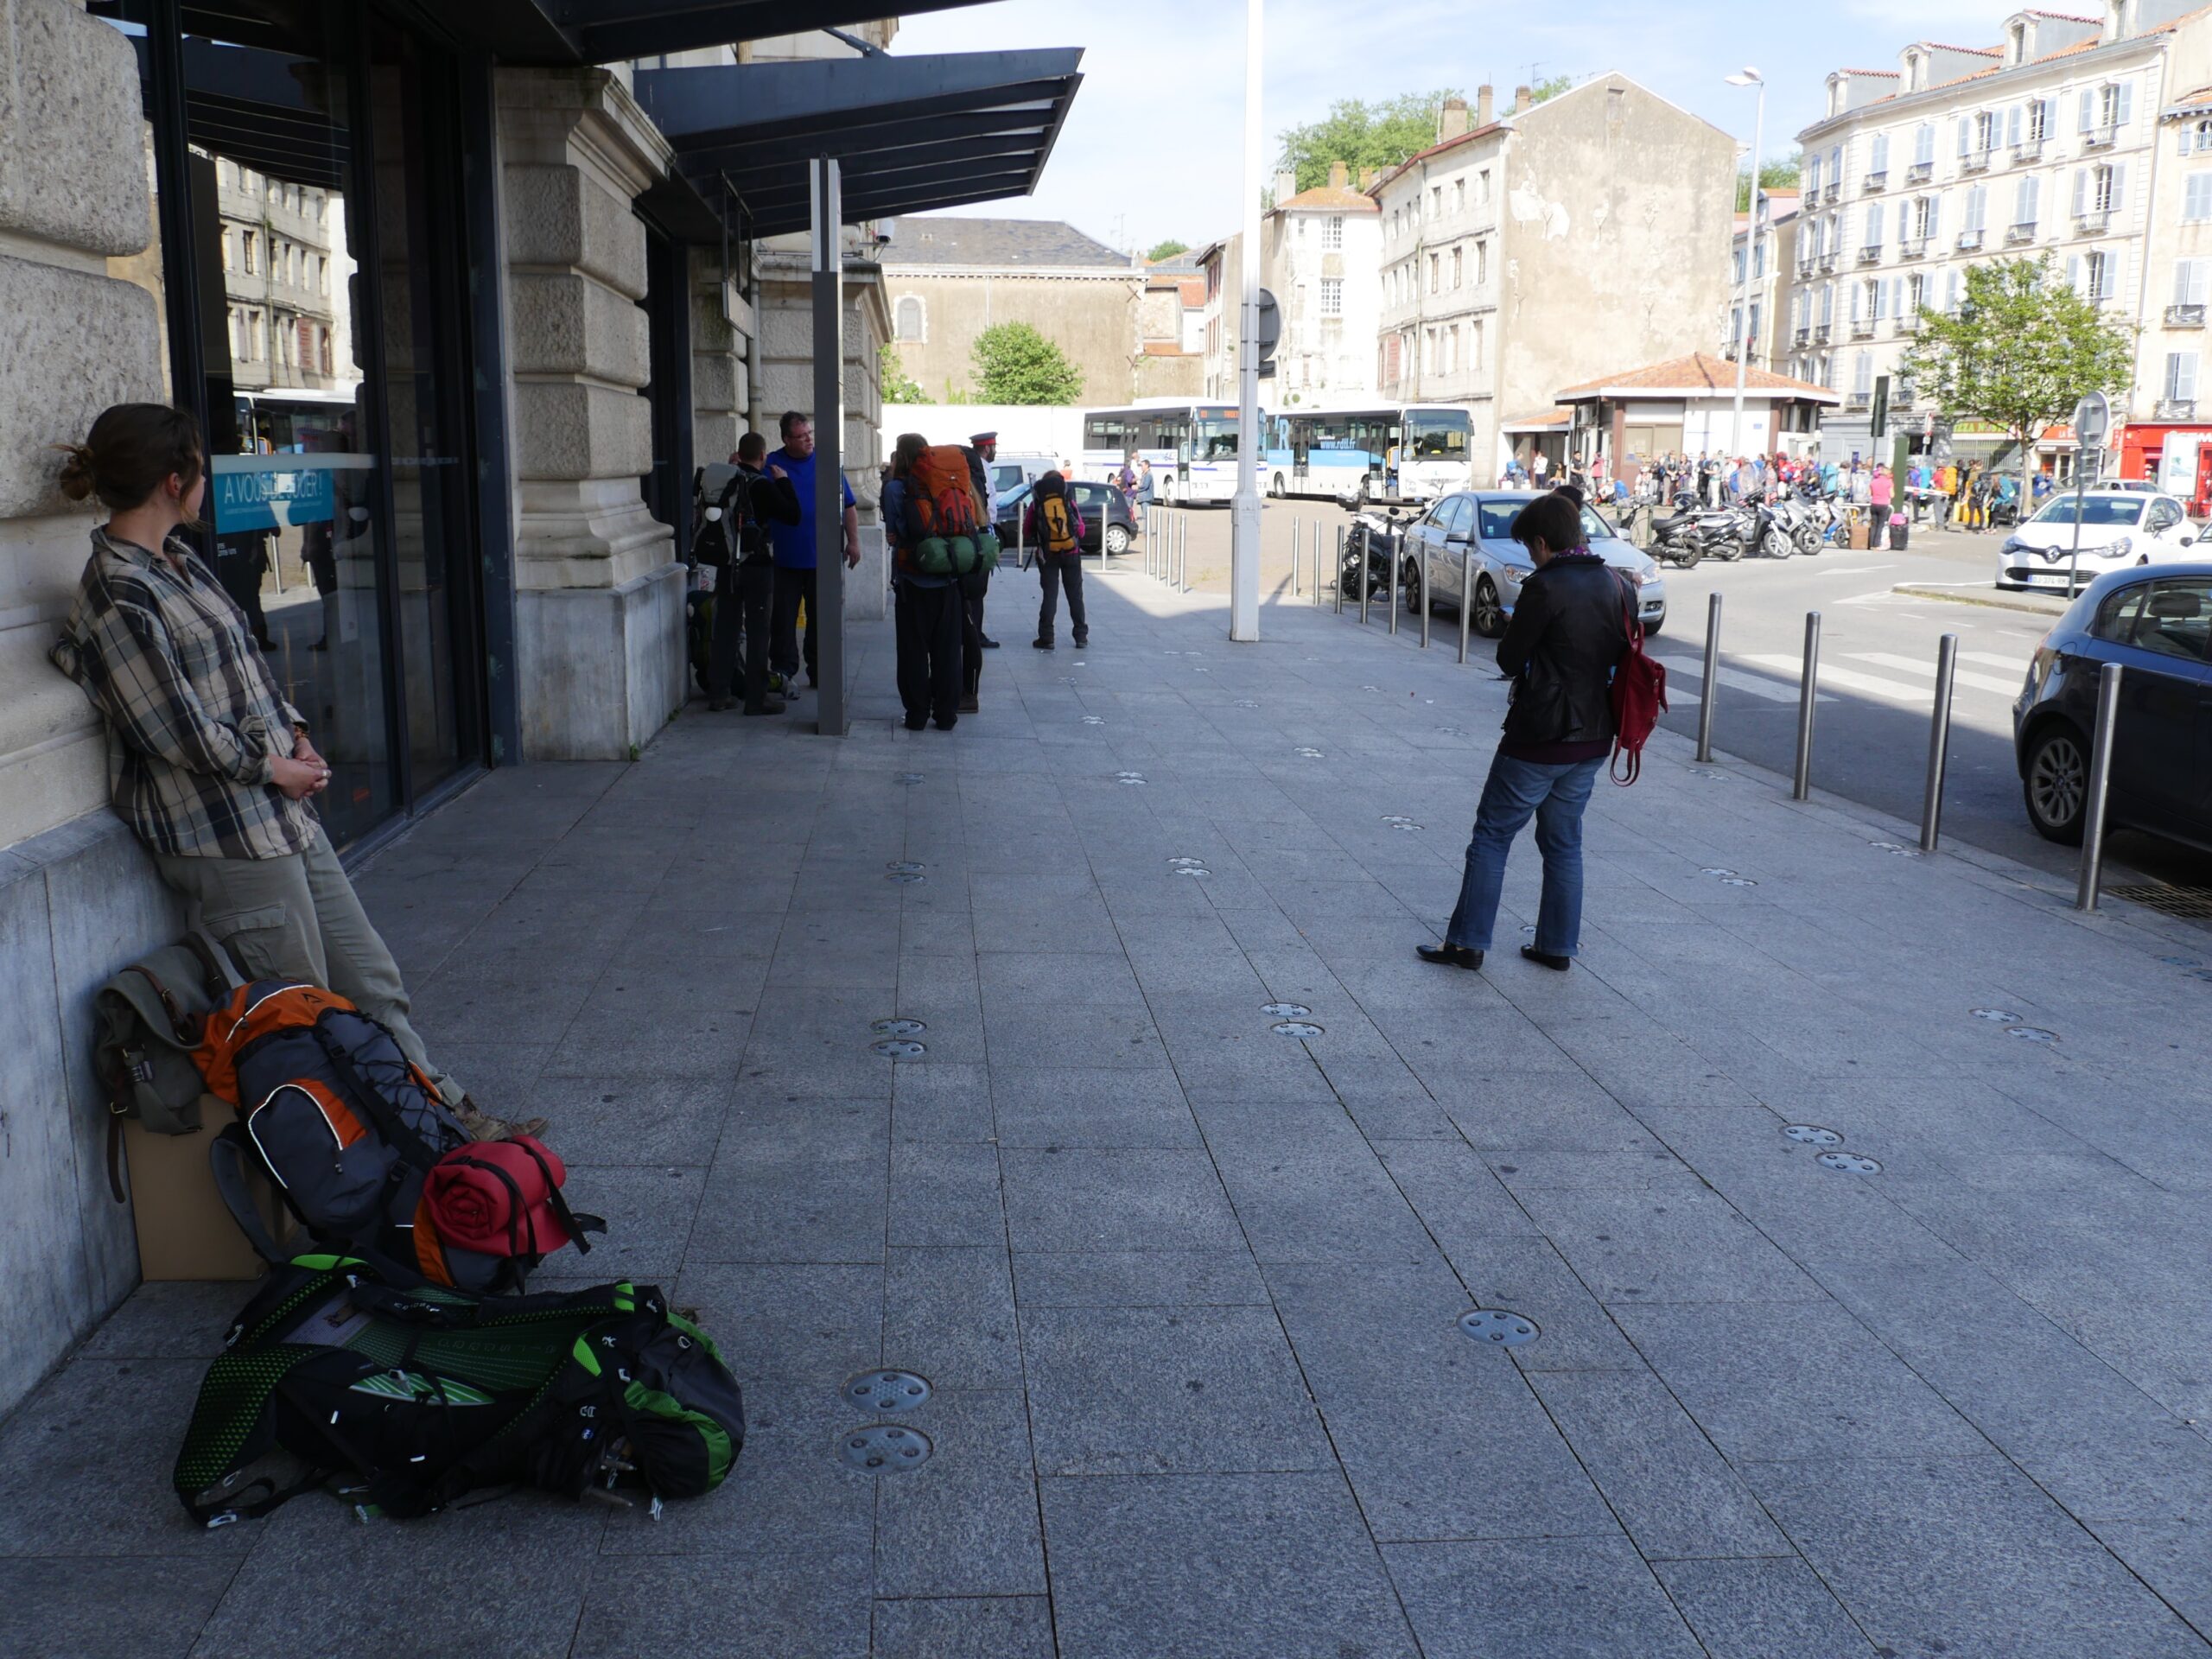 A young woman at the train station in Bayonne, France prepares to hike the Camino de Santiago while waiting for a bus to Saint-Jean-Pied-de-Port.